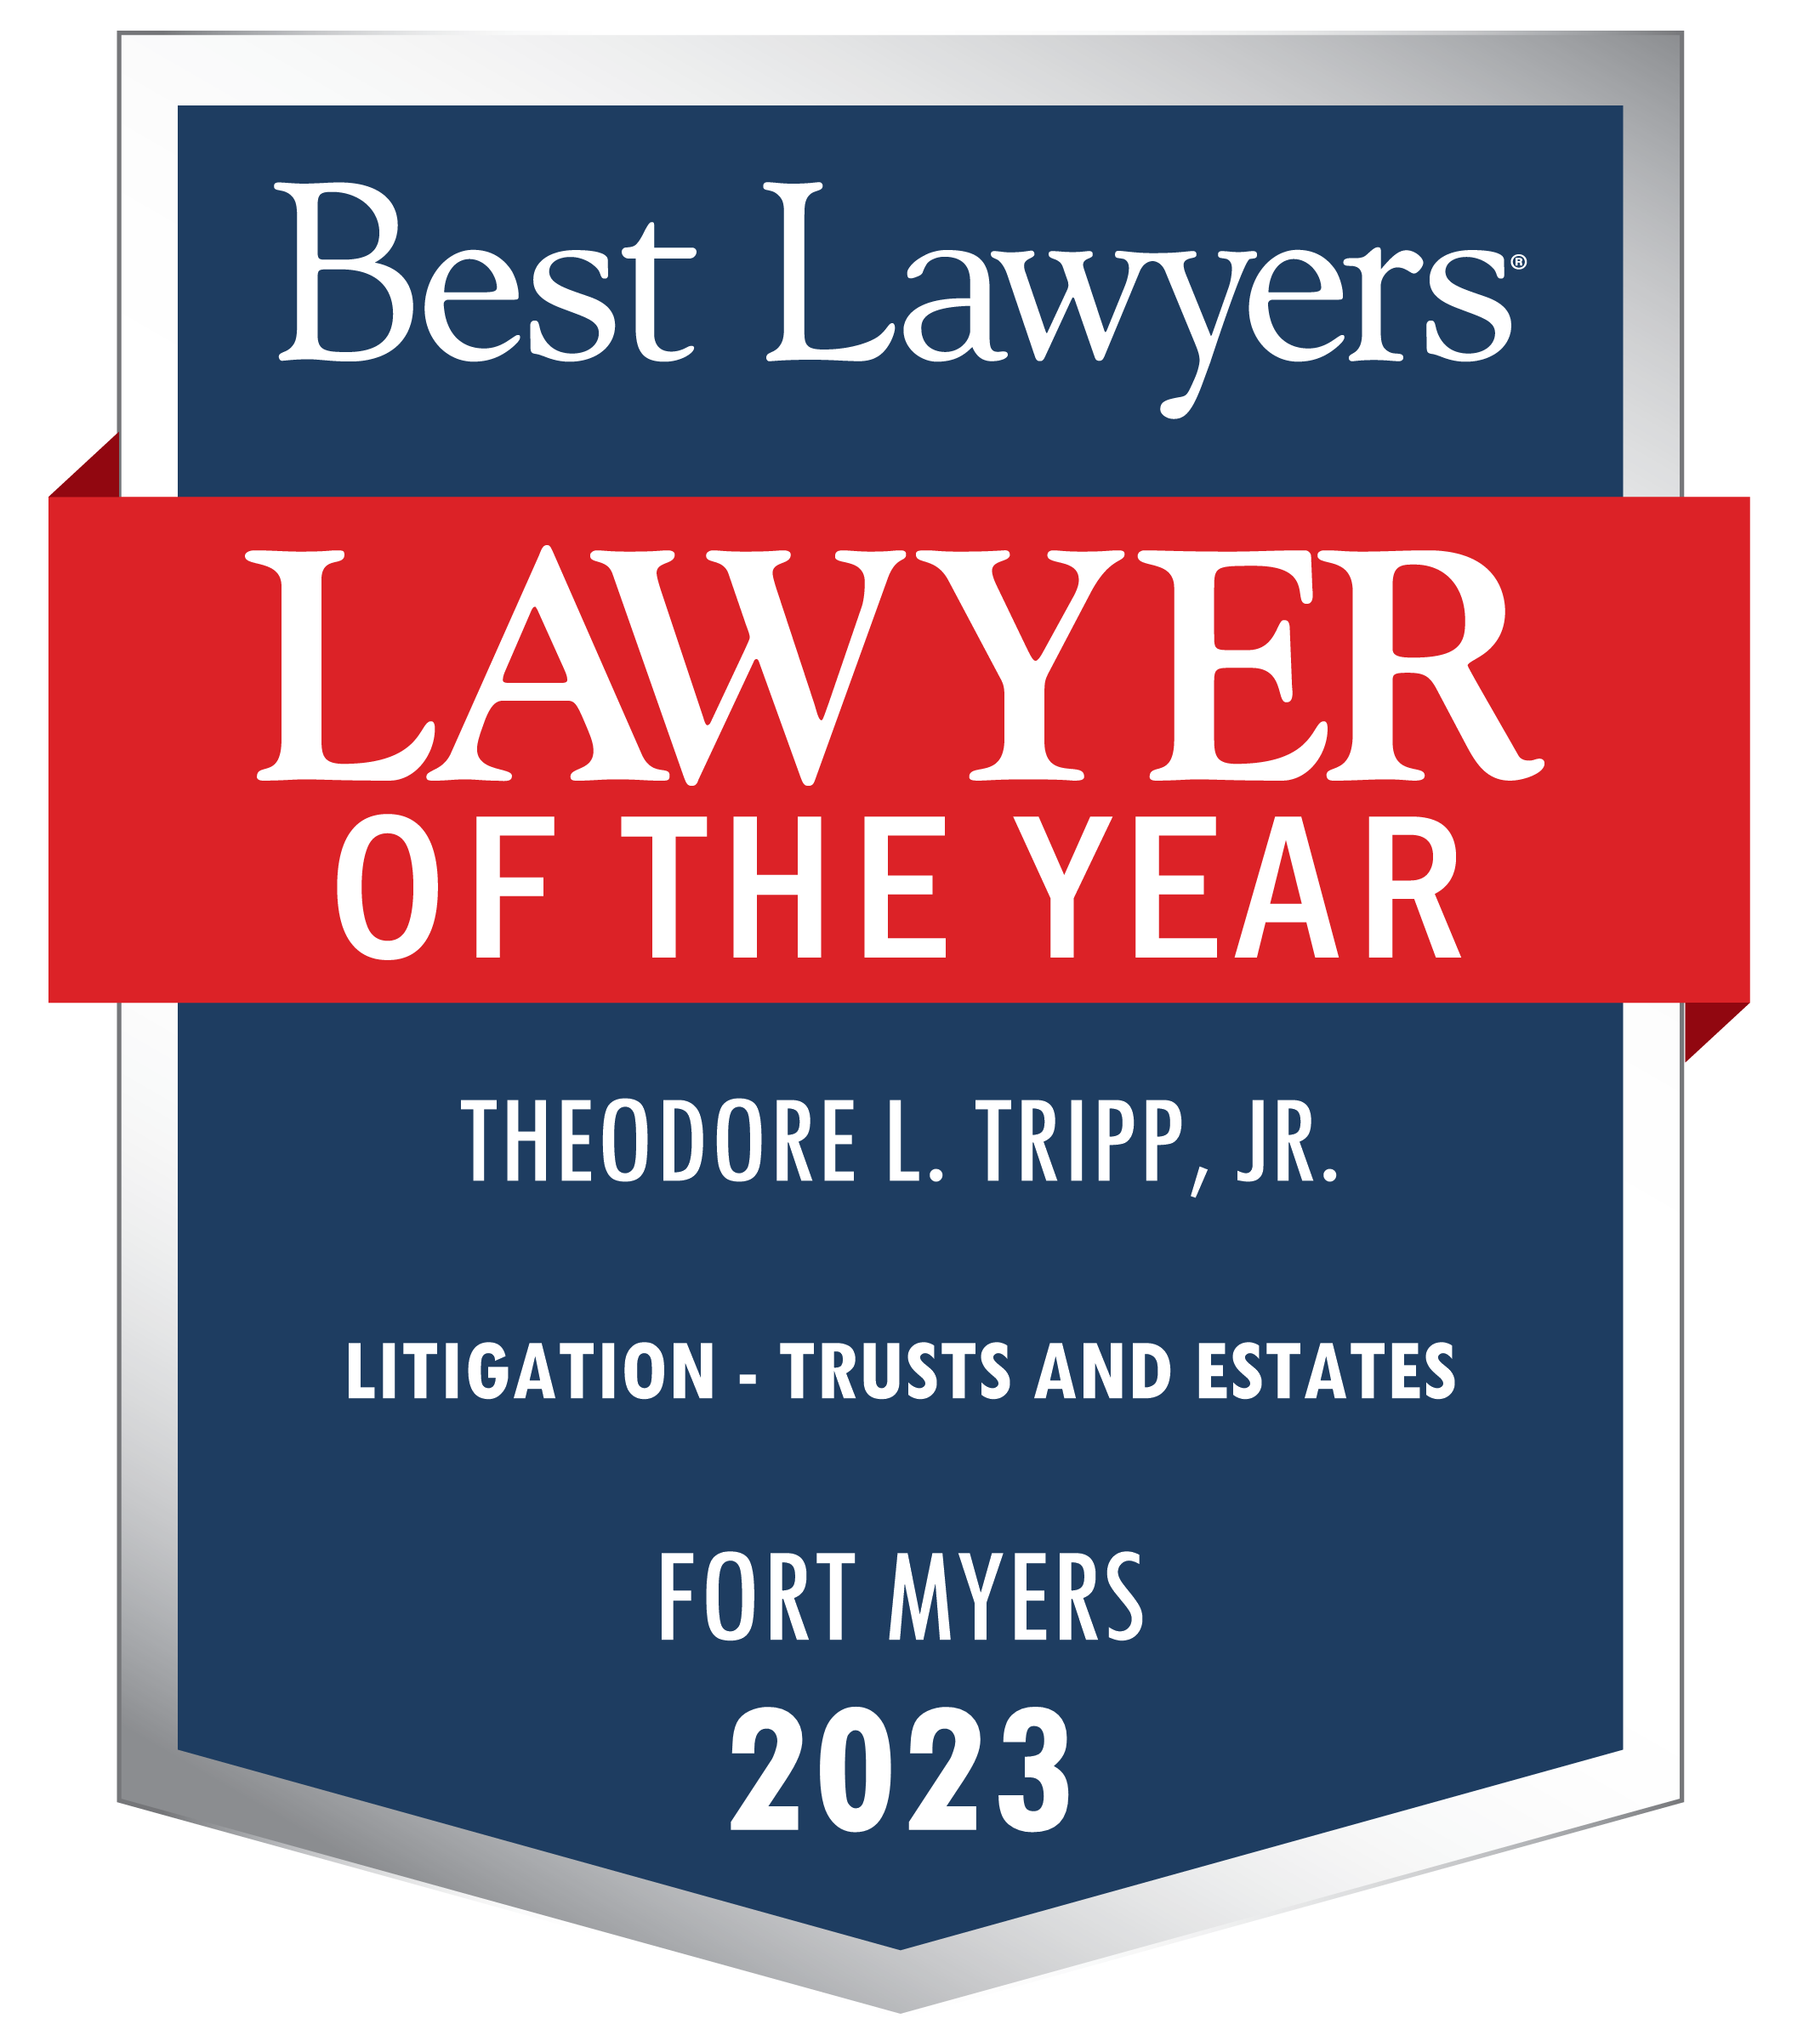 Lawyer of the Year - Ted Tripp